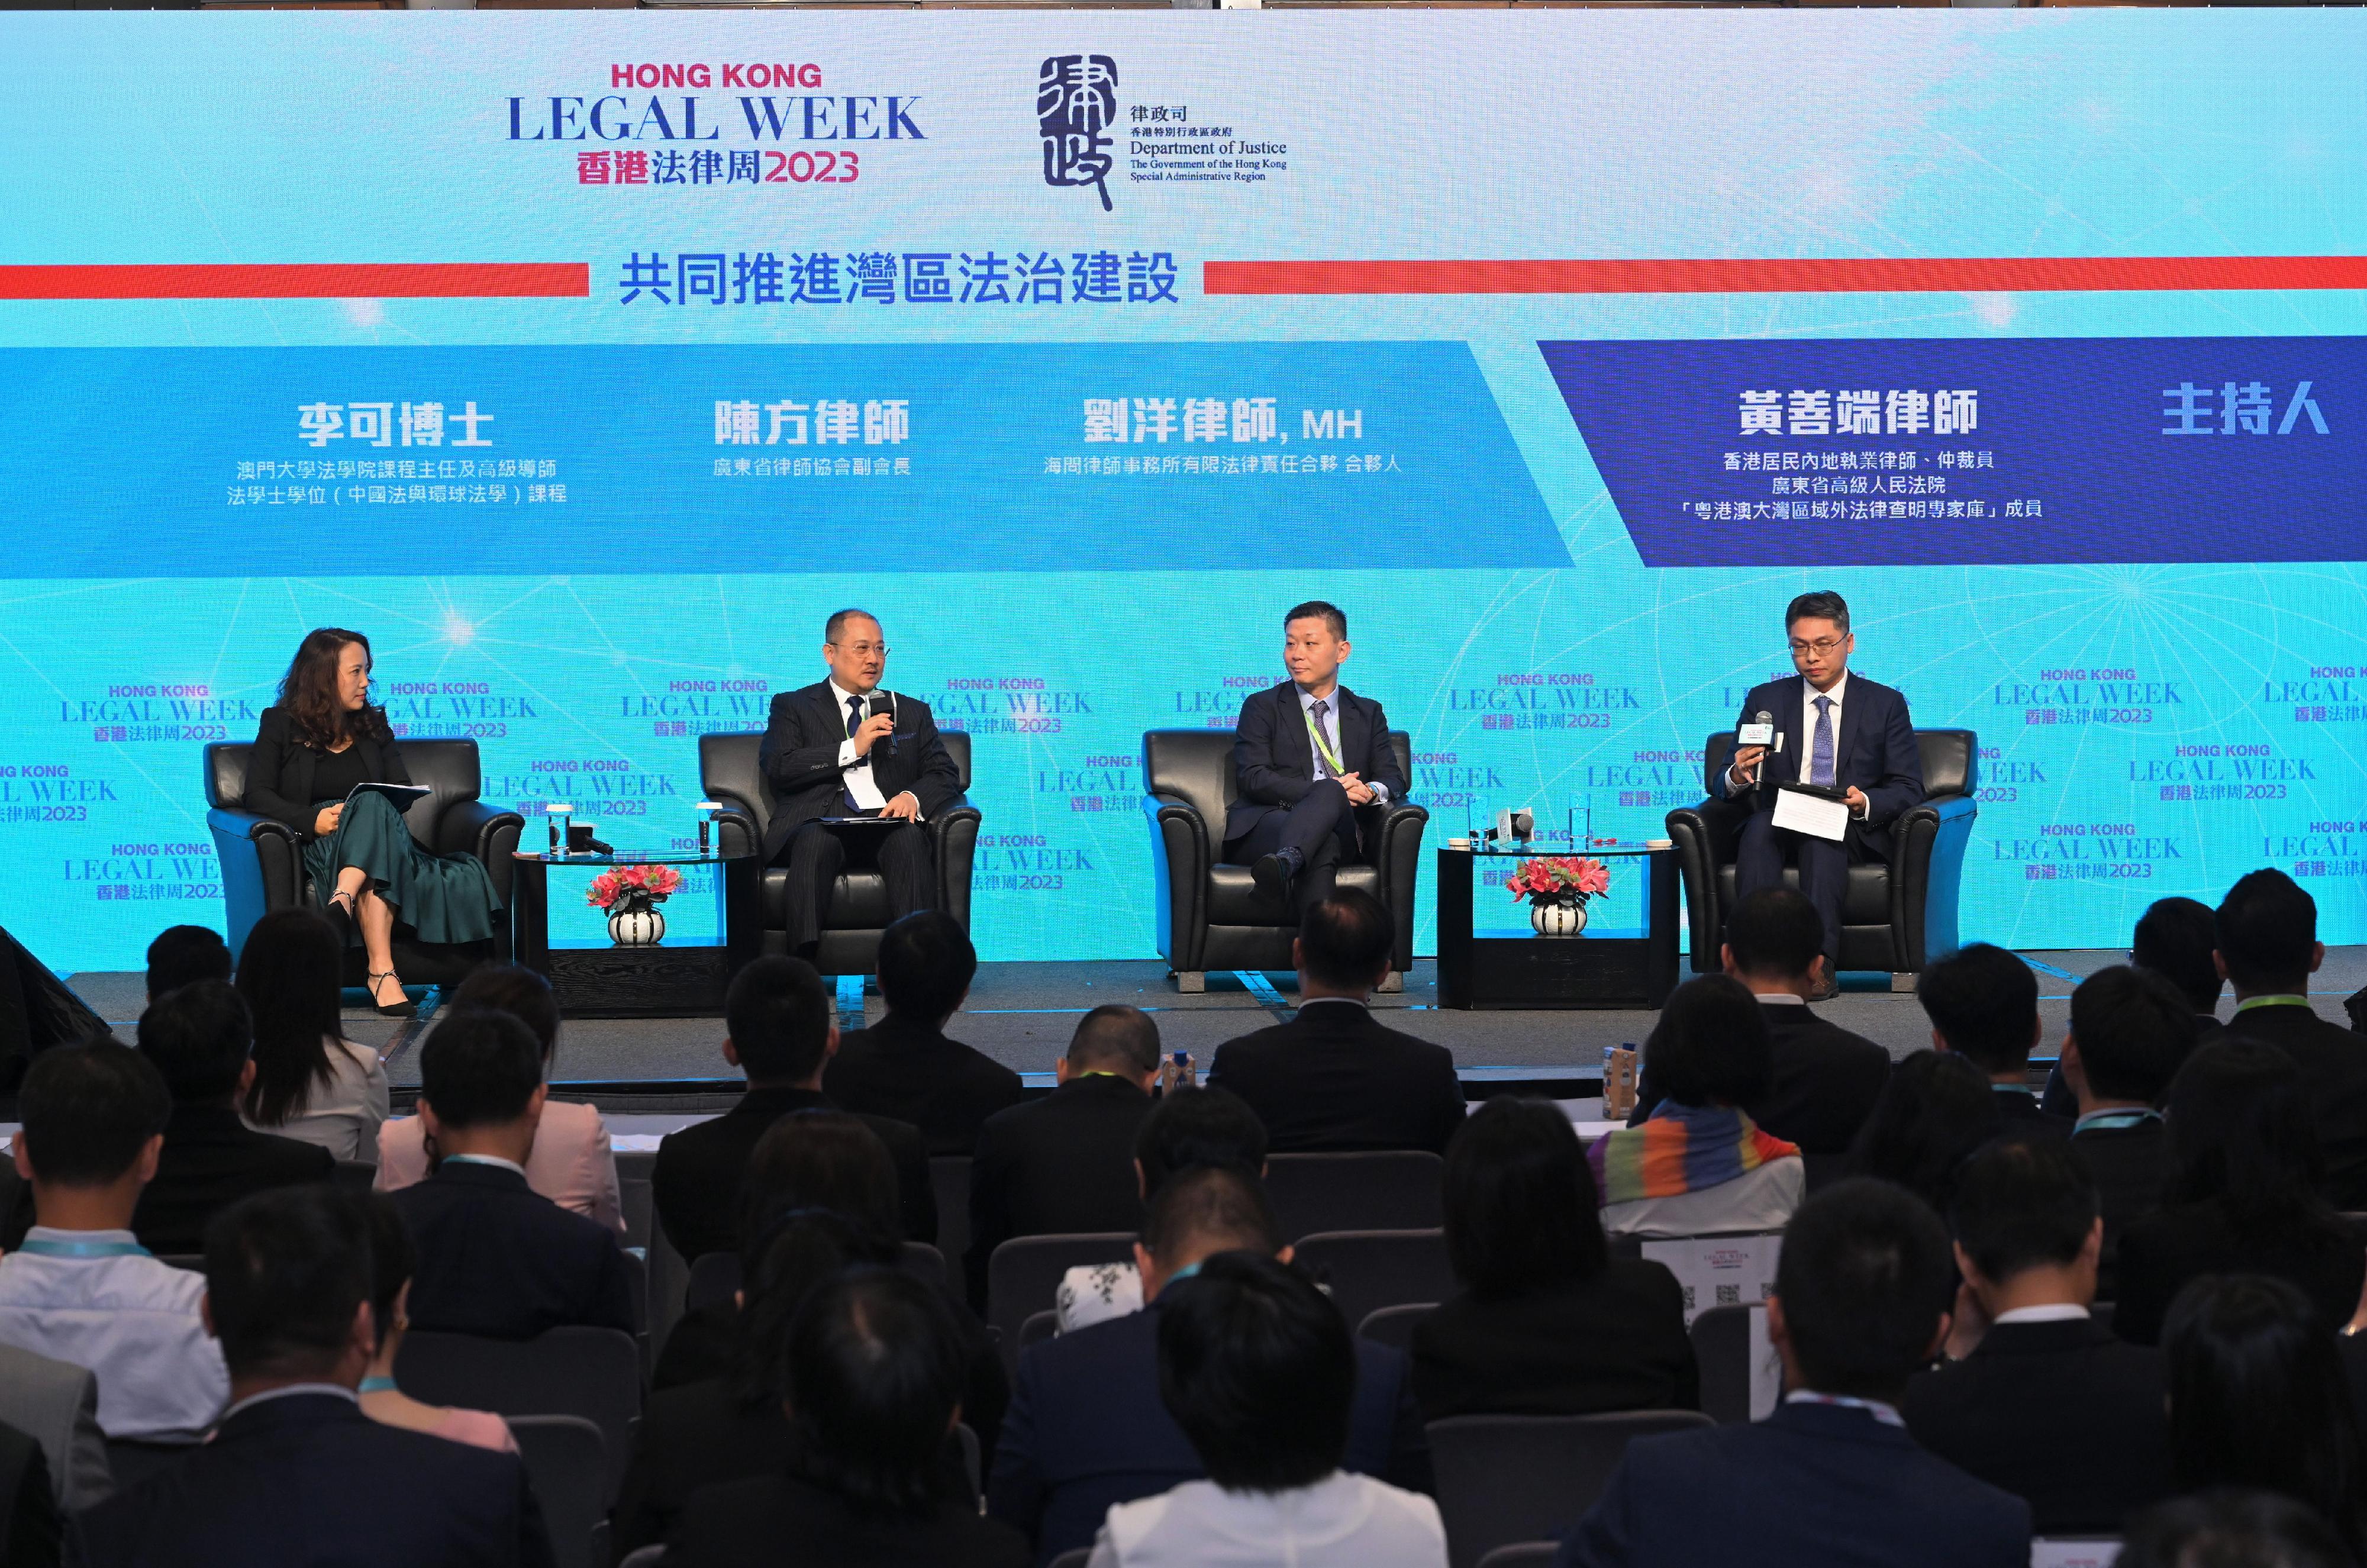 A forum under the theme "Gateway to the Opportunities in the GBA" under the Hong Kong Legal Week 2023 was held today (November 9). Photo shows legal practitioners and a scholar gathering at a panel discussion to explore from various perspectives how to promote the rule of law development in the Greater Bay Area.